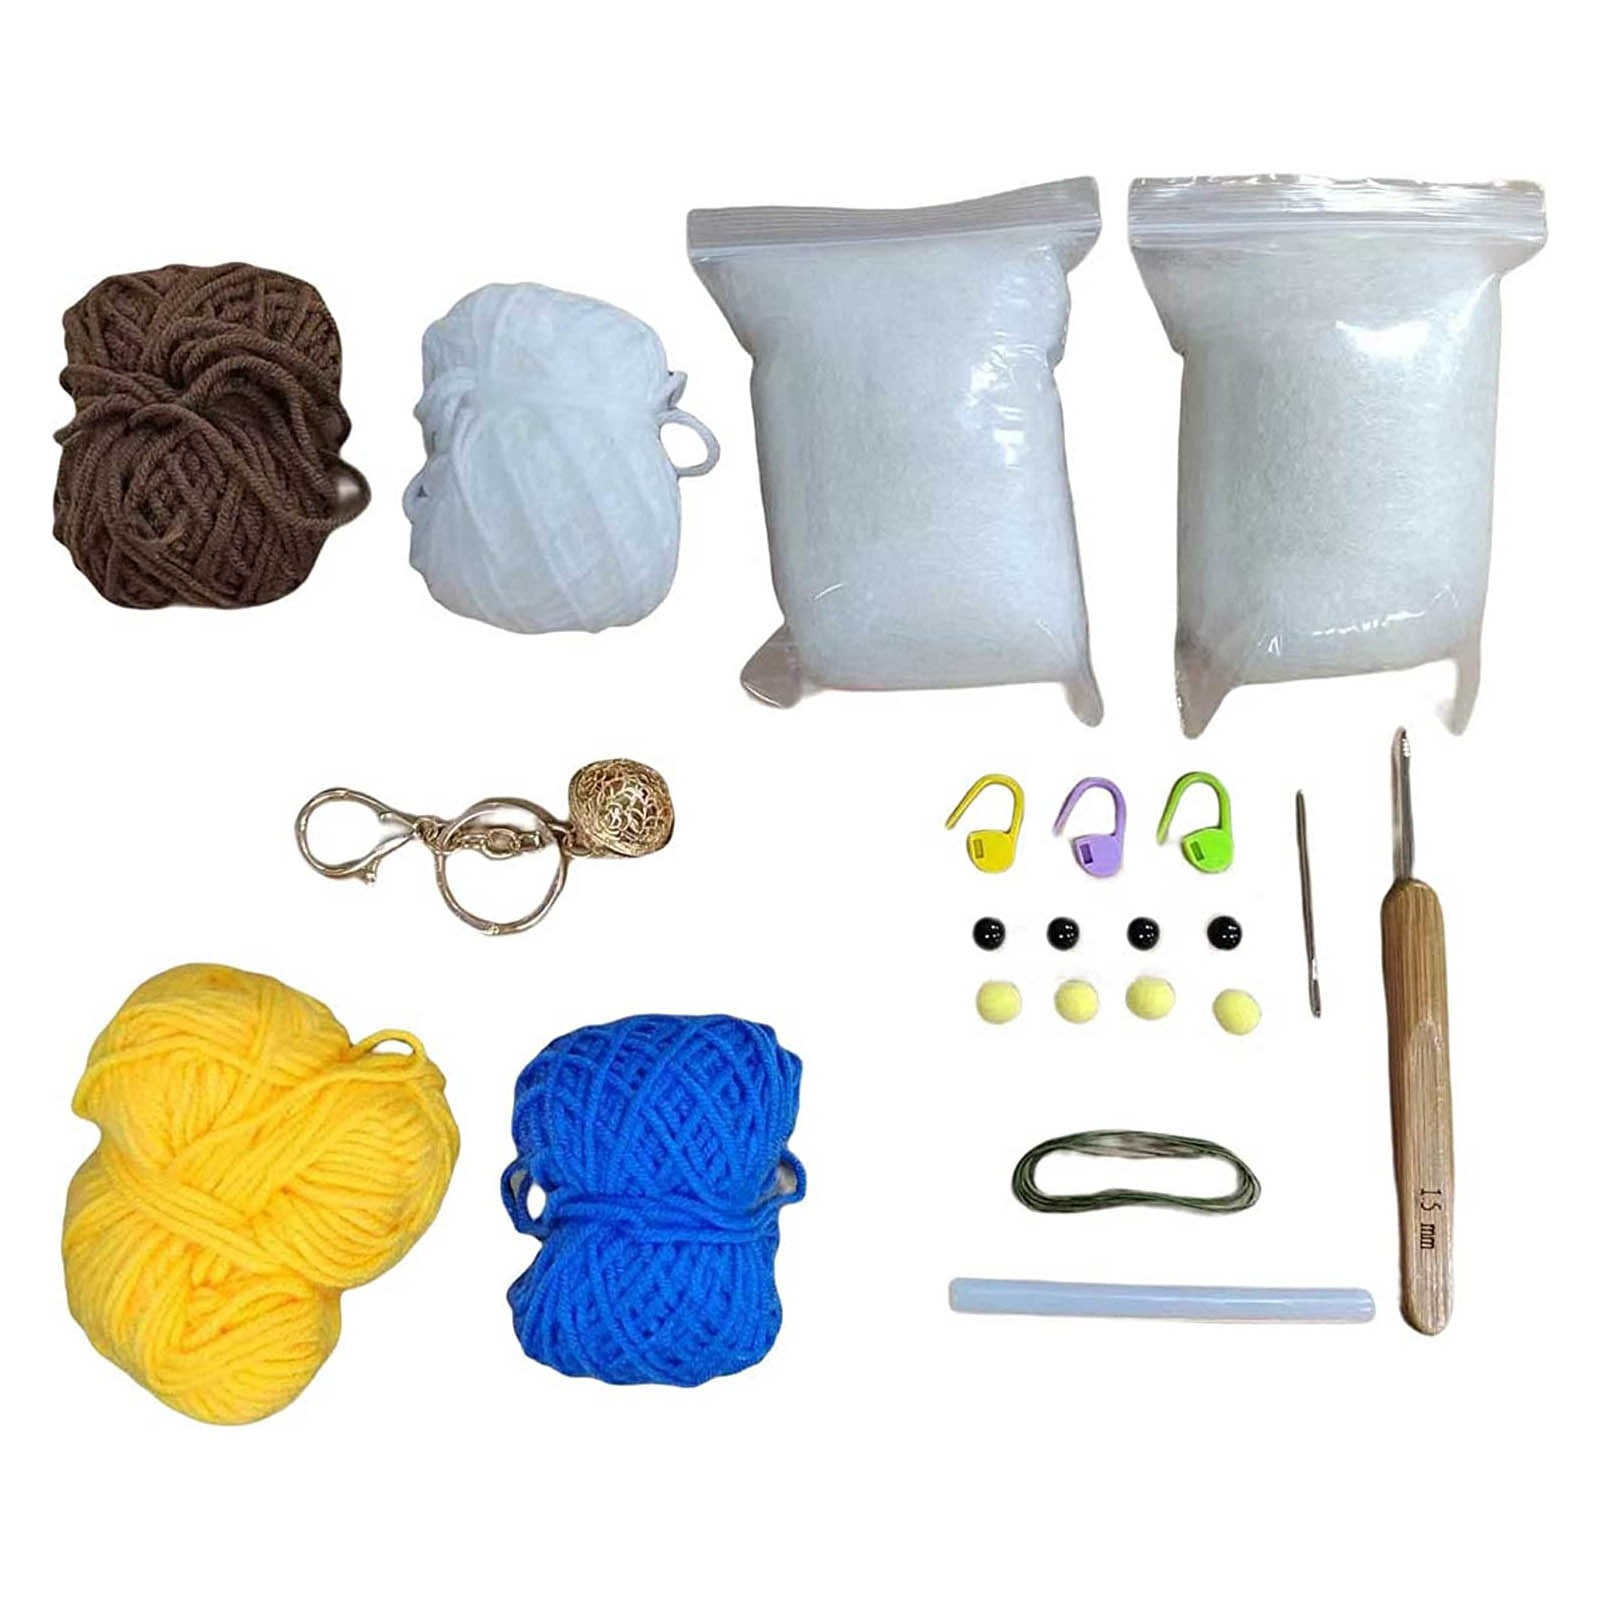 WQJNWEQ Clearance Turtle Bee Crochet Kit for Beginners - DIY and